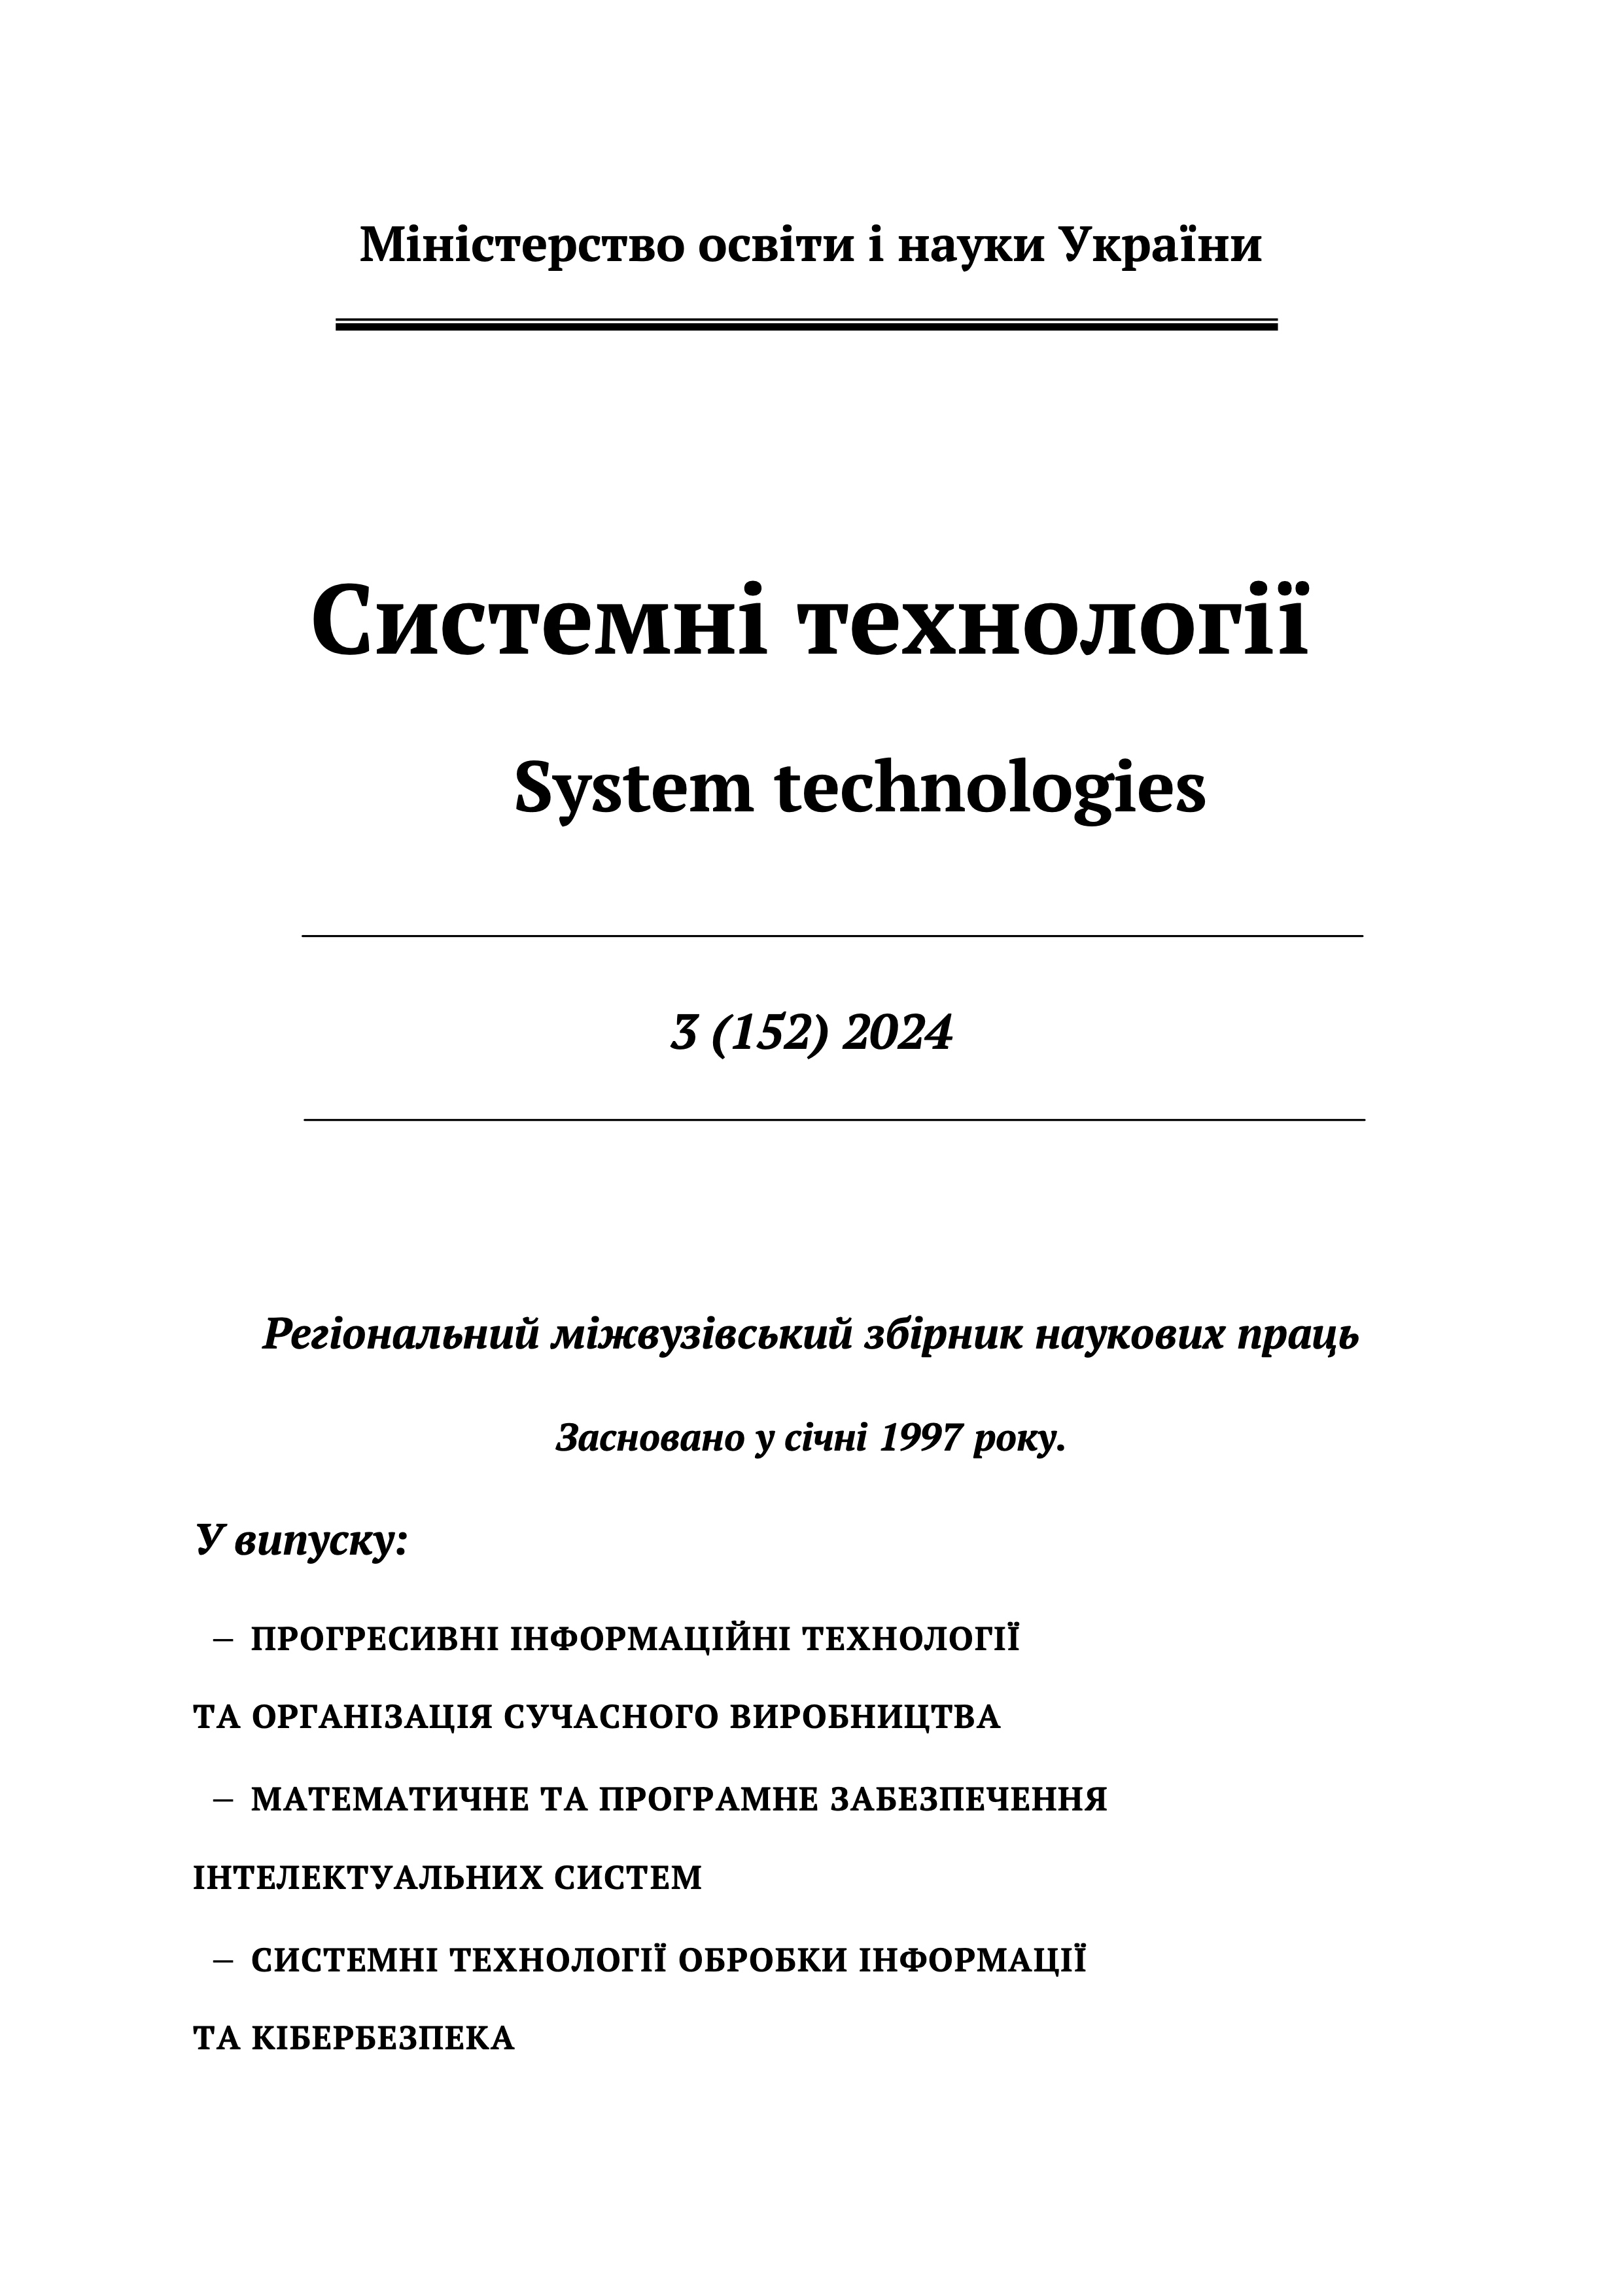 					View Vol. 3 No. 152 (2024): System technologies
				